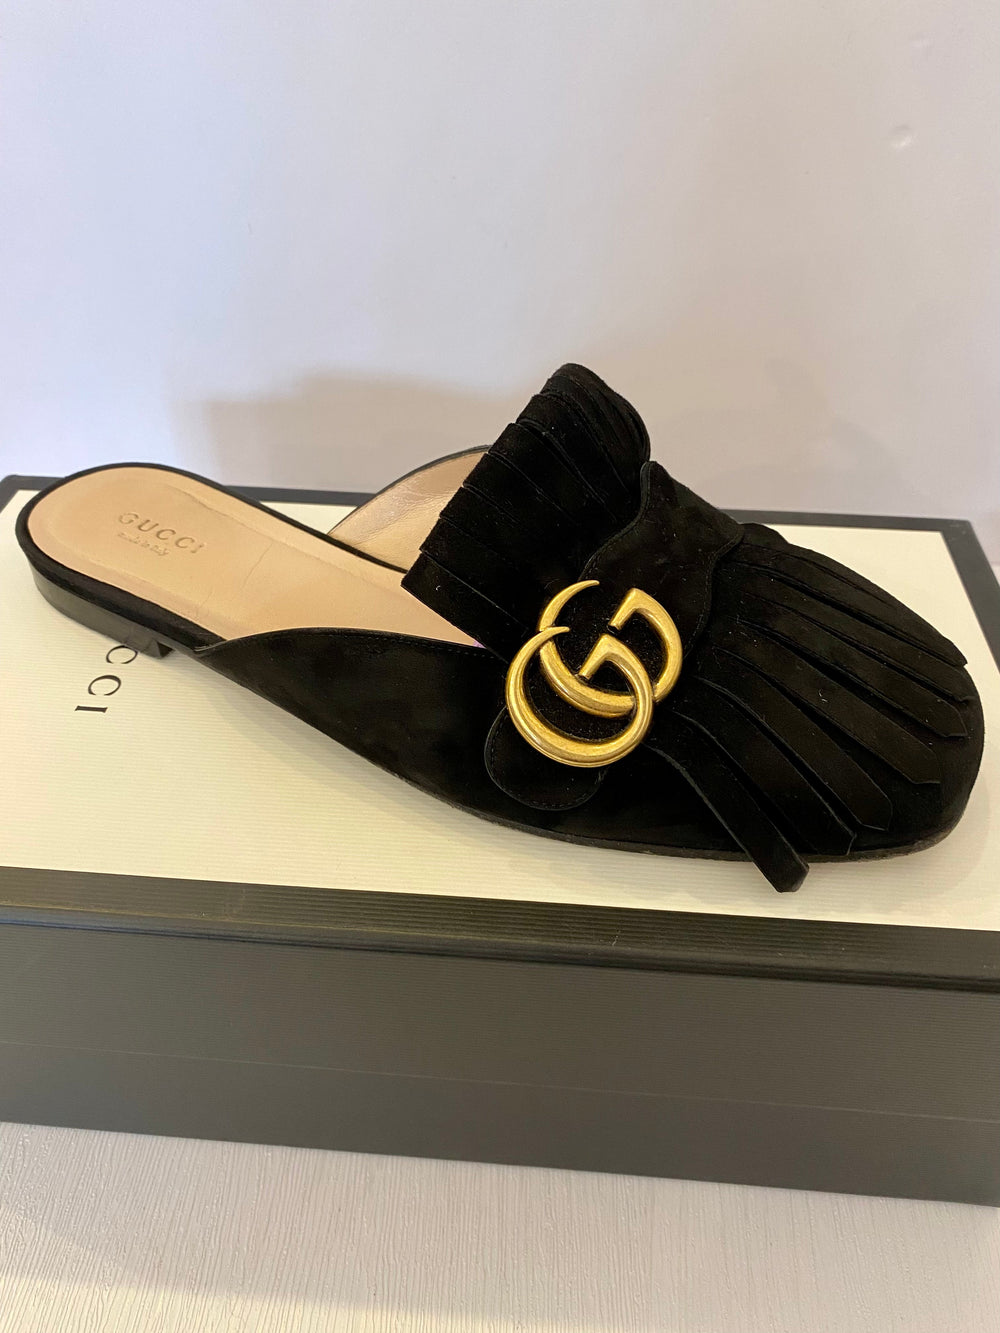 Gucci Marmont Black Suede Fringed Mule Loafers uk6